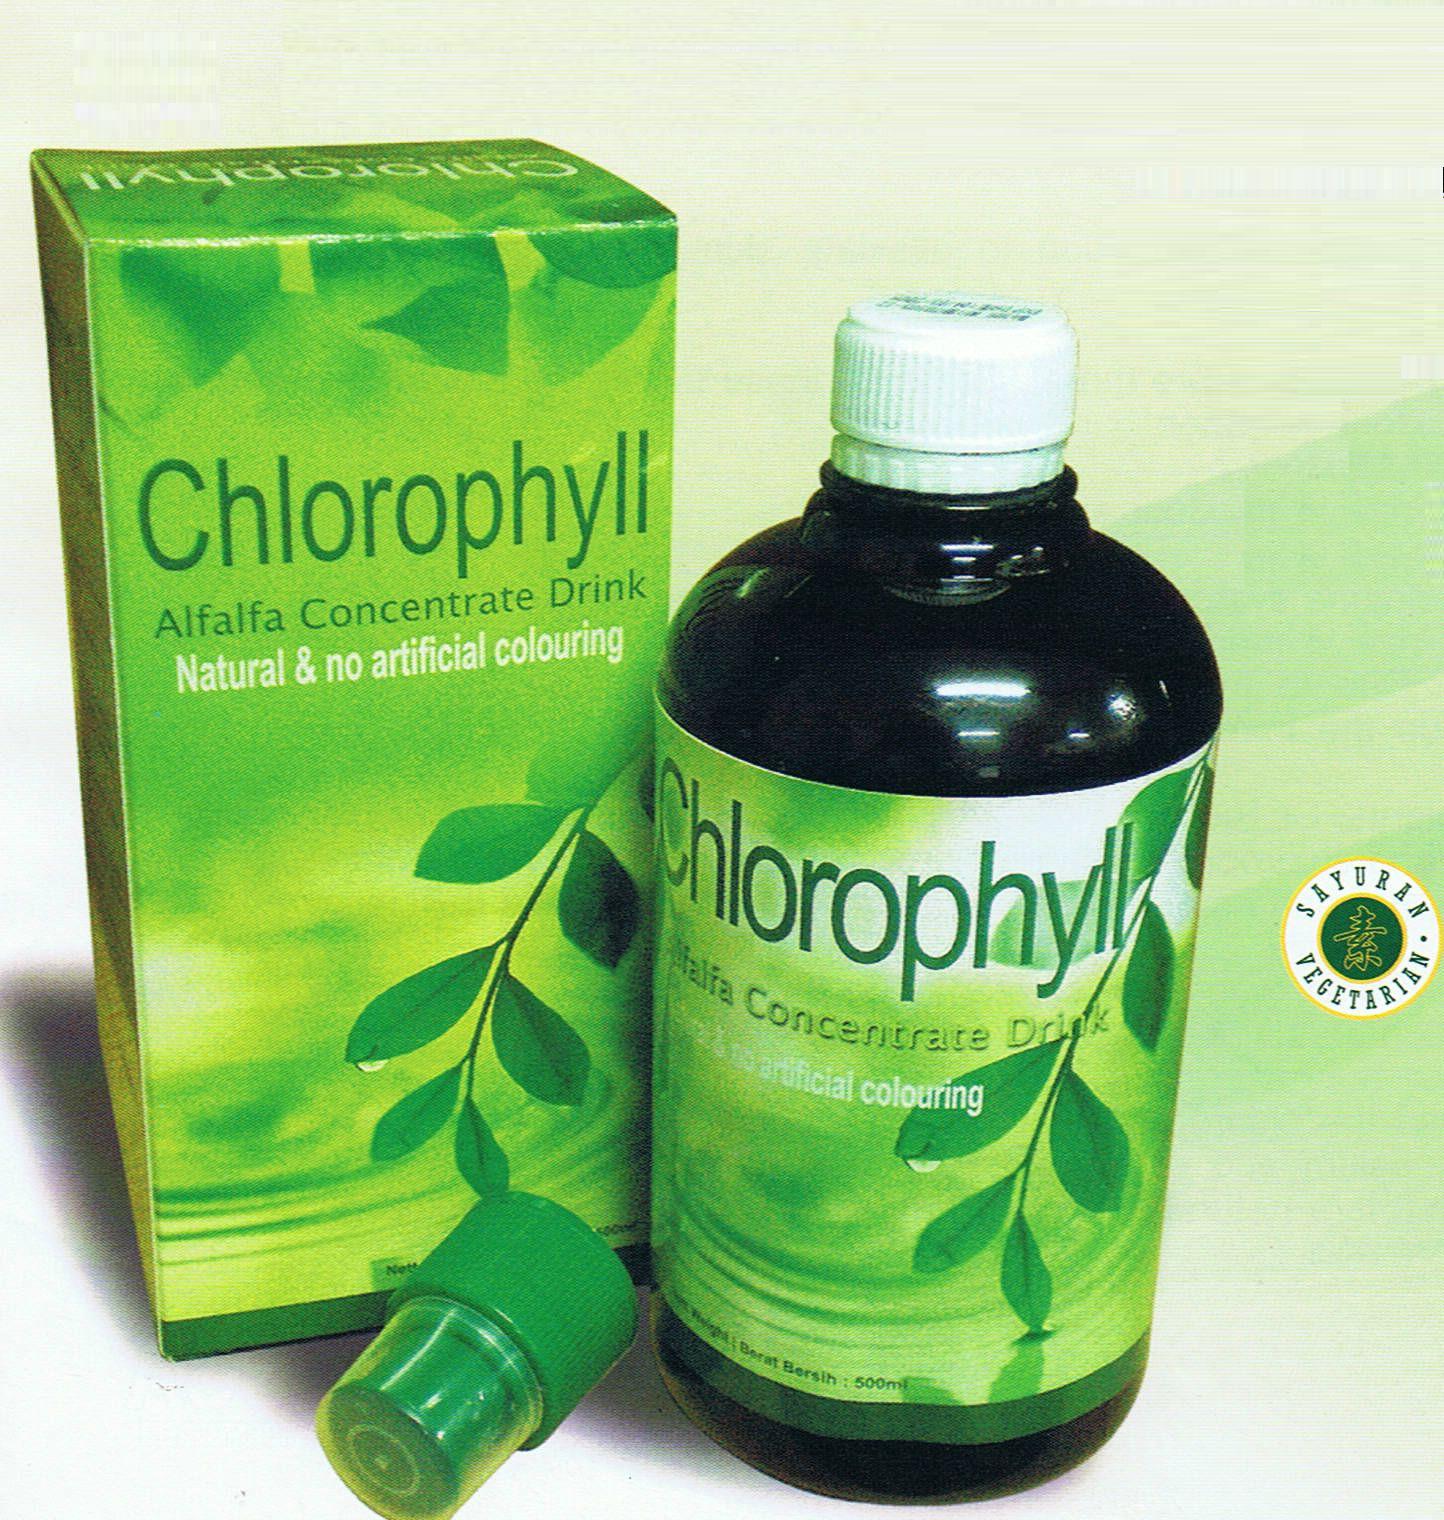 What is a chlorophyll drink?